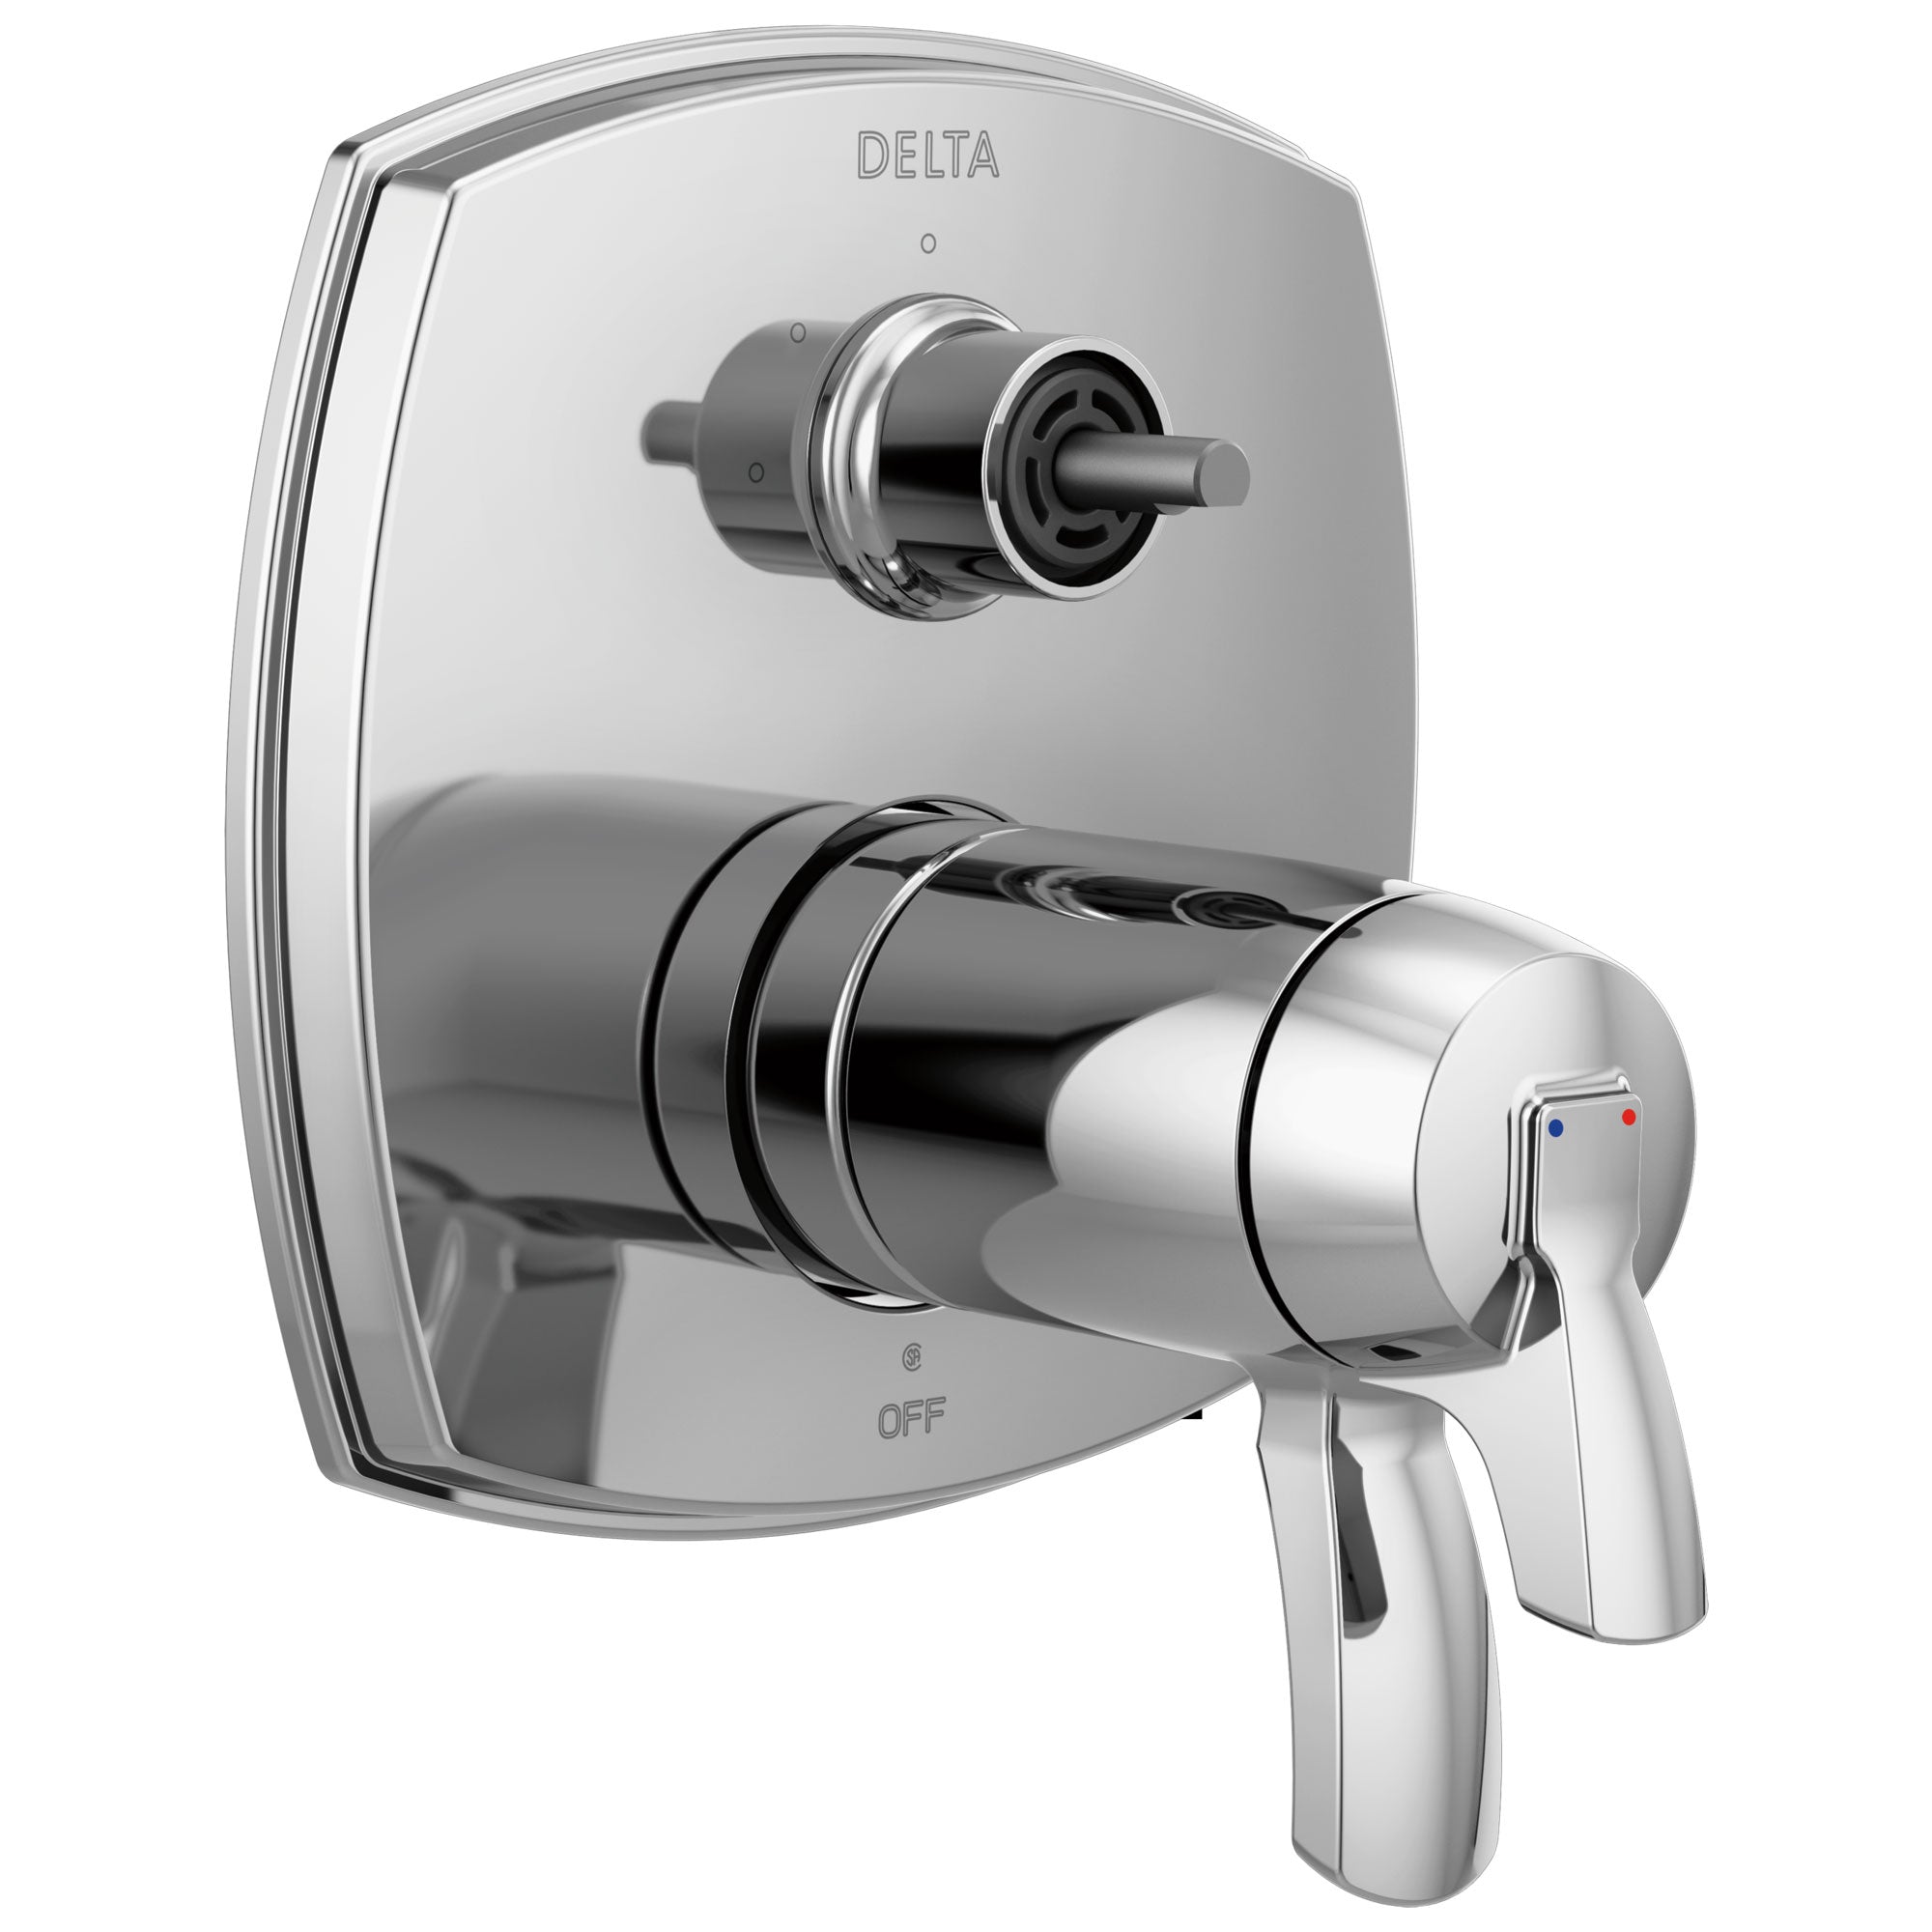 Delta Stryke Chrome Finish 17 Thermostatic Integrated Diverter Shower Control Trim Kit with Three Function Diverter Less Diverter Handle (Requires Valve) DT27T876LHP